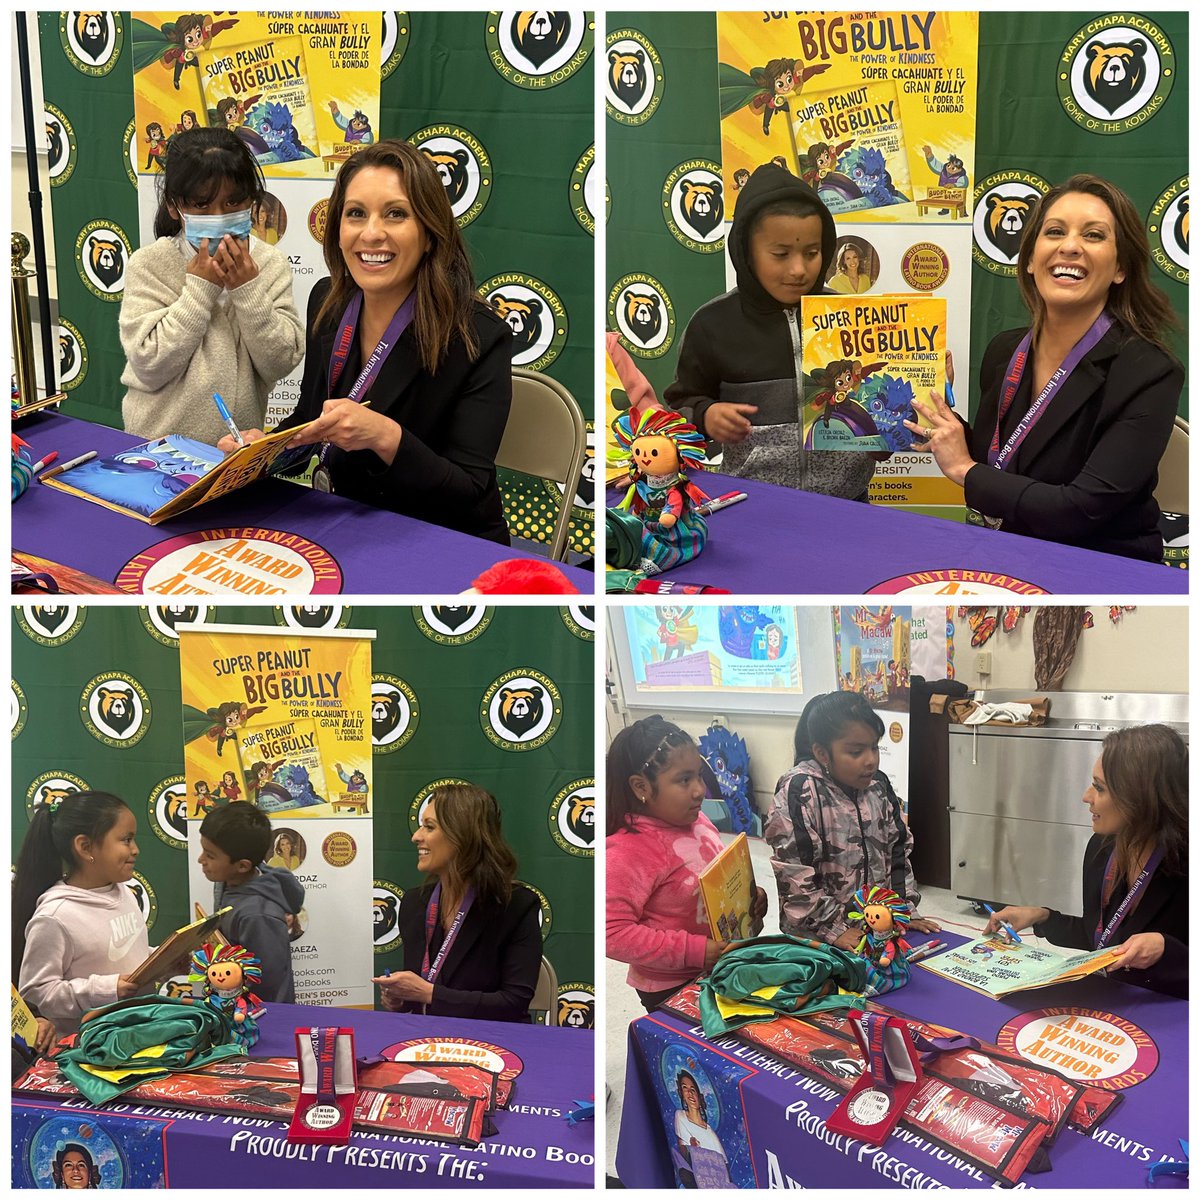 Sharing some sweet moments from our book signing with special guest Leticia Ordaz. Our students are inspired by Leticia’s son who co- authored her latest book. 

💚🐻☀️📚
@zjgalvan @AracelyZavala19 @ms_pantaleon @CielitoLindoBks 
#ProudtobeGUSD #CultivateCuriosity